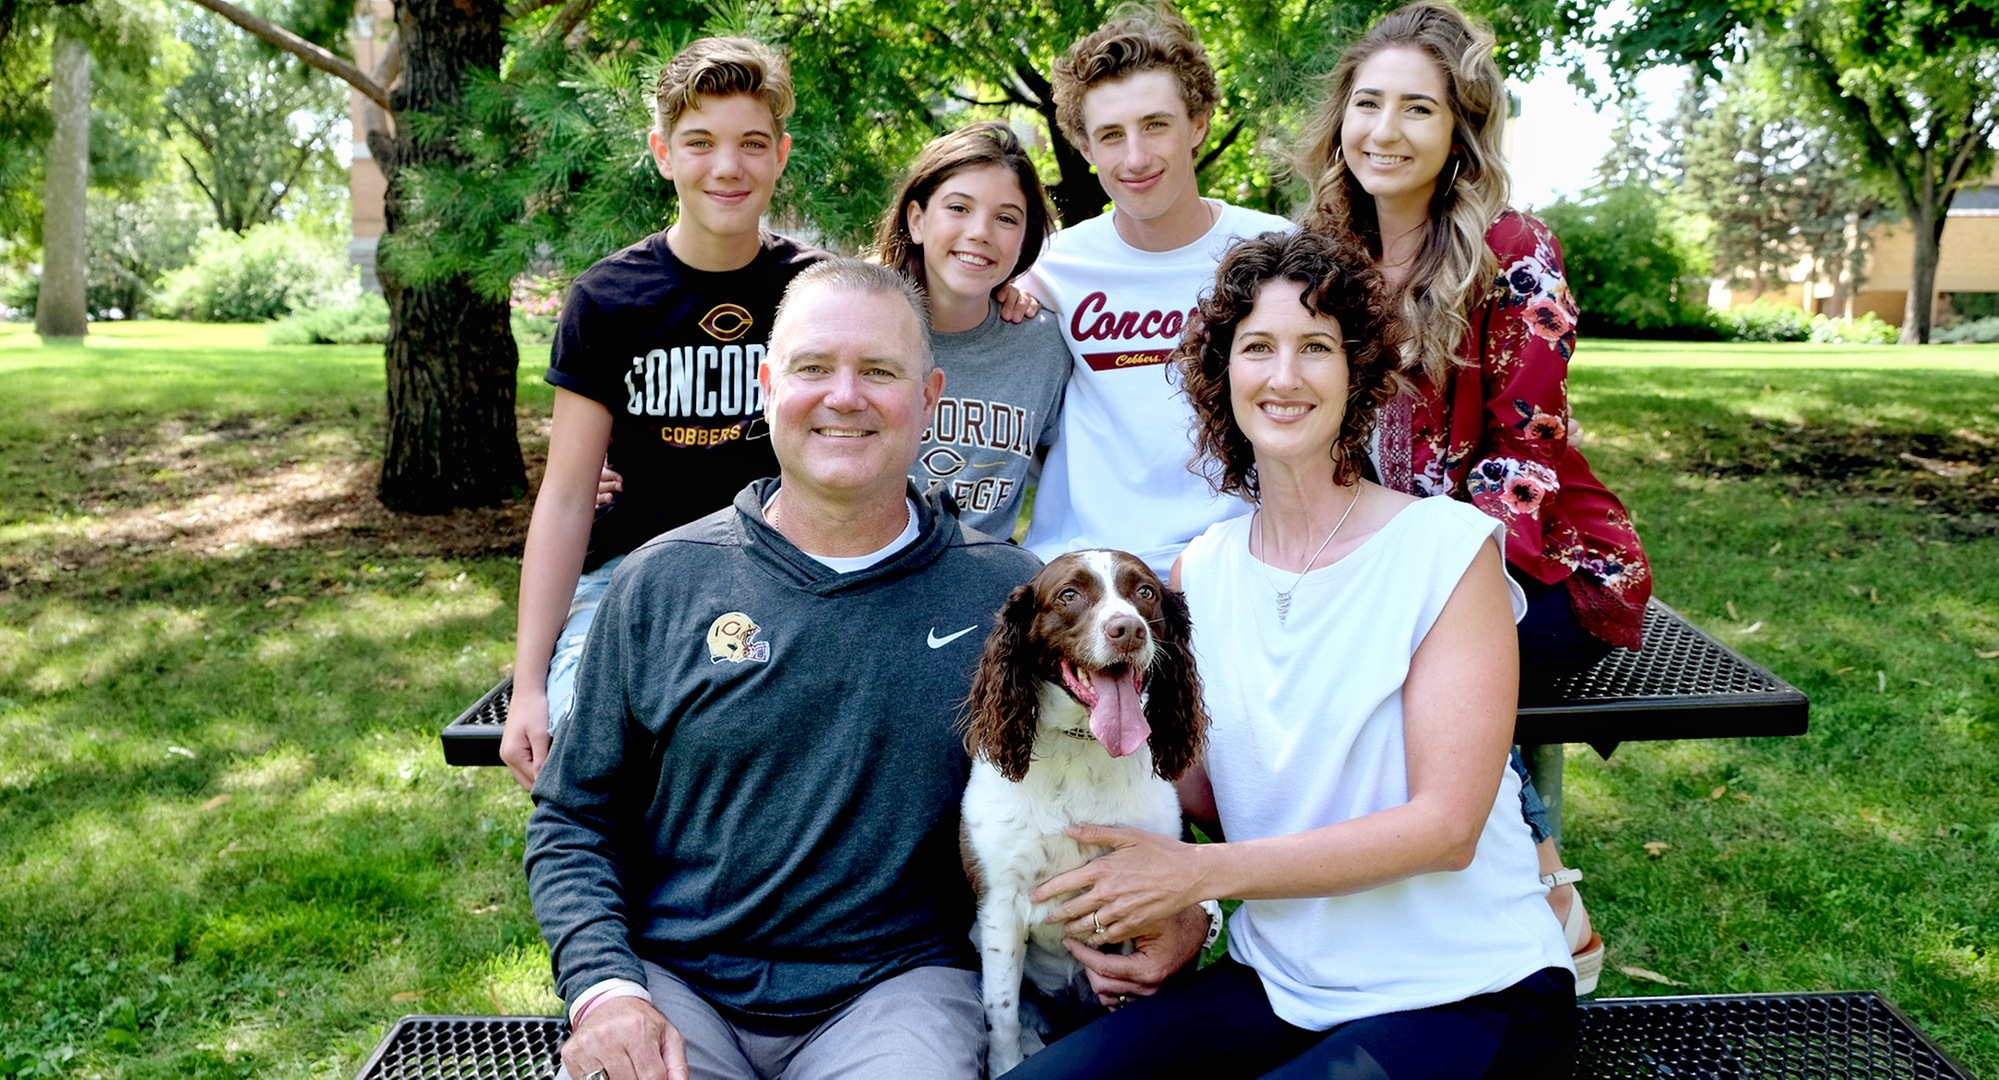 Terry Horan and family. Bottom row: Terry, dog Lucky, wife Michelle. Top row (L-R): Tate, Annie, Thomas, Meghan.